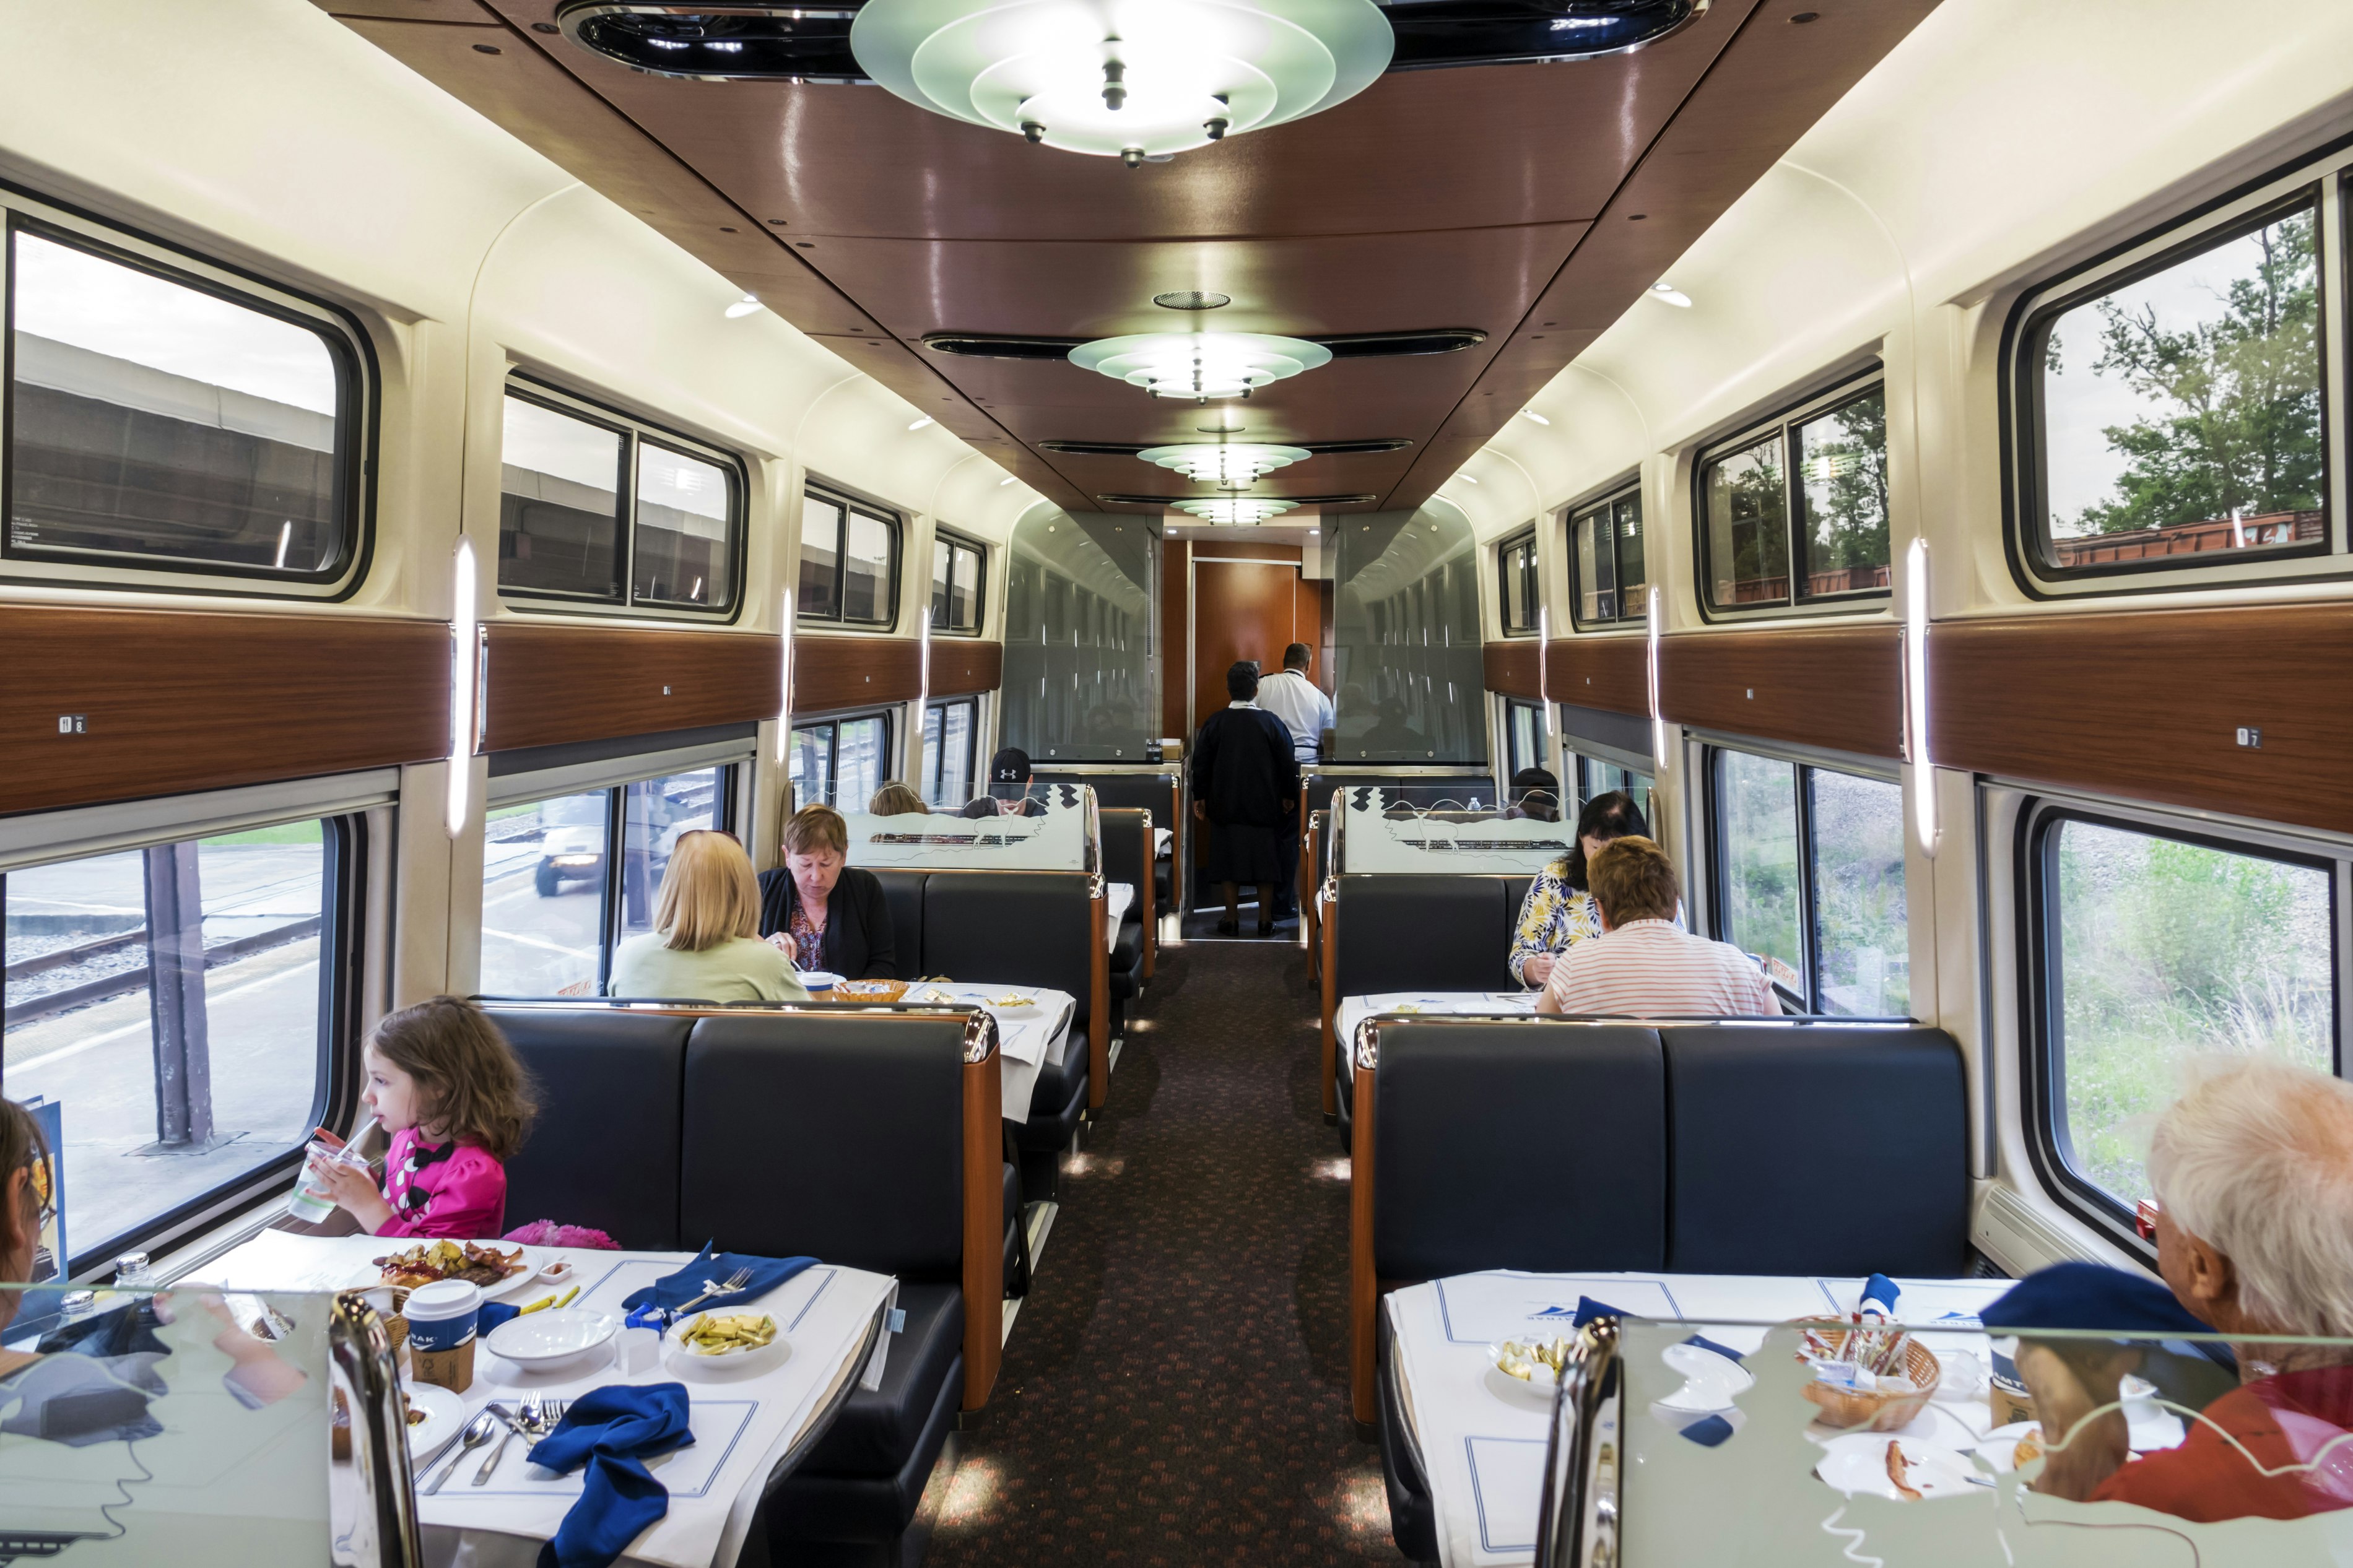 Scattering of young and old customers seated in Amtrak's dining car for breakfast service